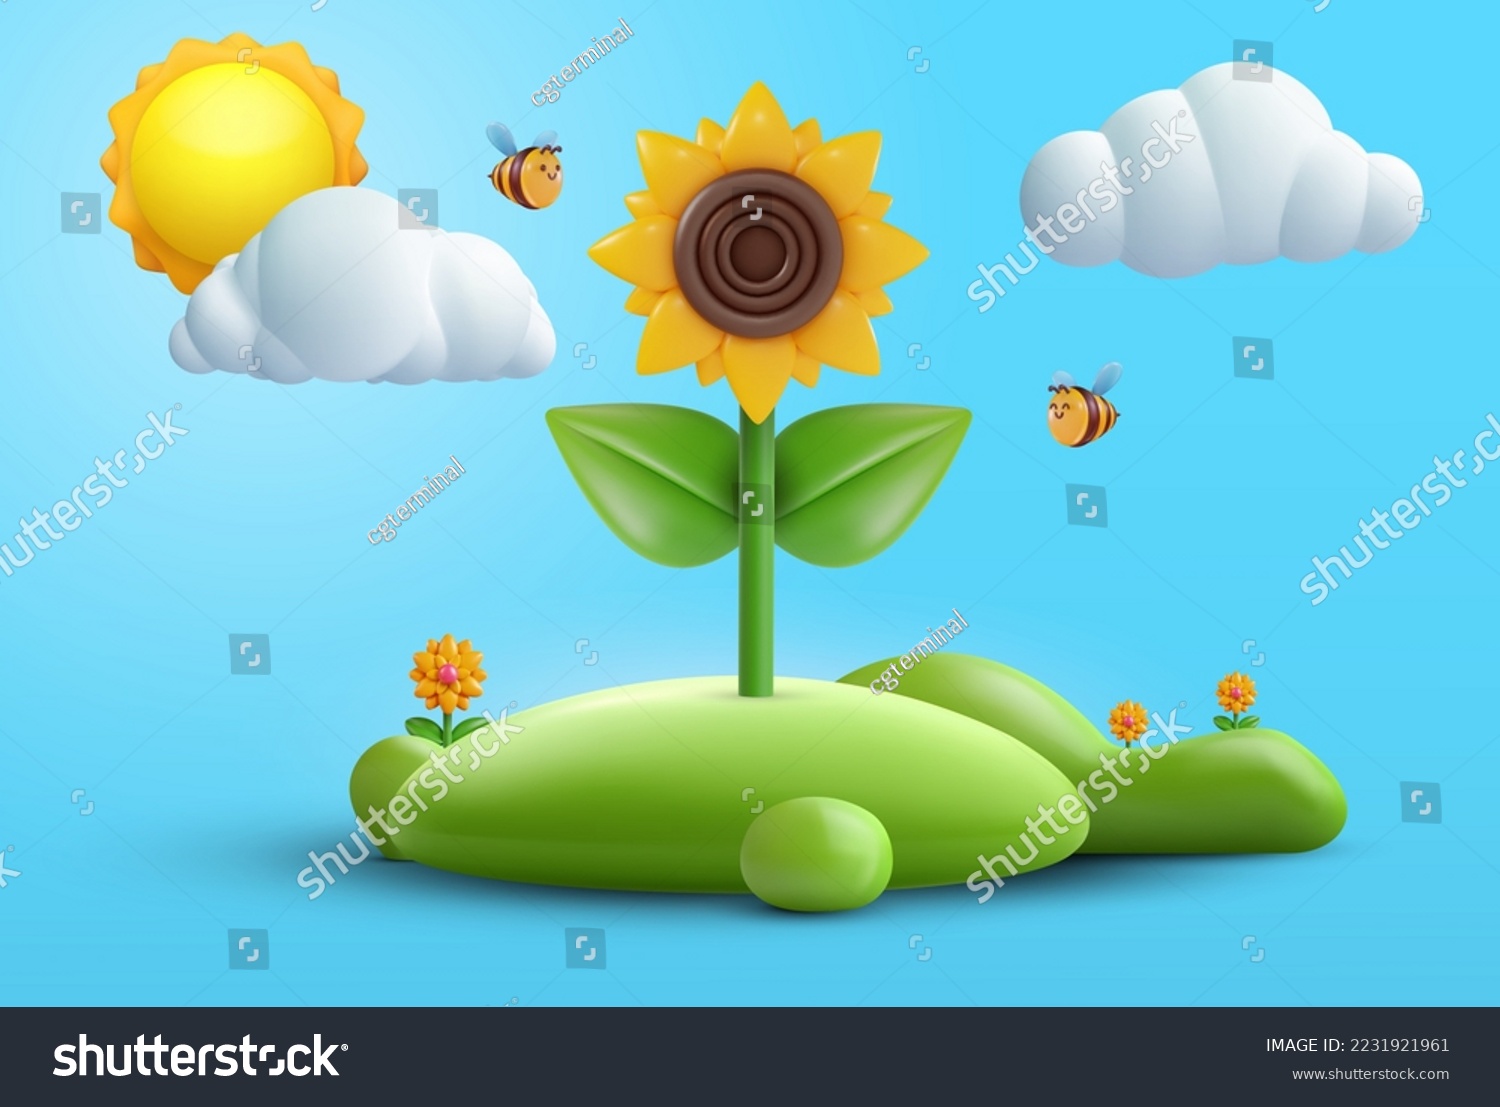 SVG of 3d cartoon composition with sunflower on green hill in vector realistic funny style. Cute art element. Plasticine or glossy clay design object. Sweet colorful illustration on minimal background. svg